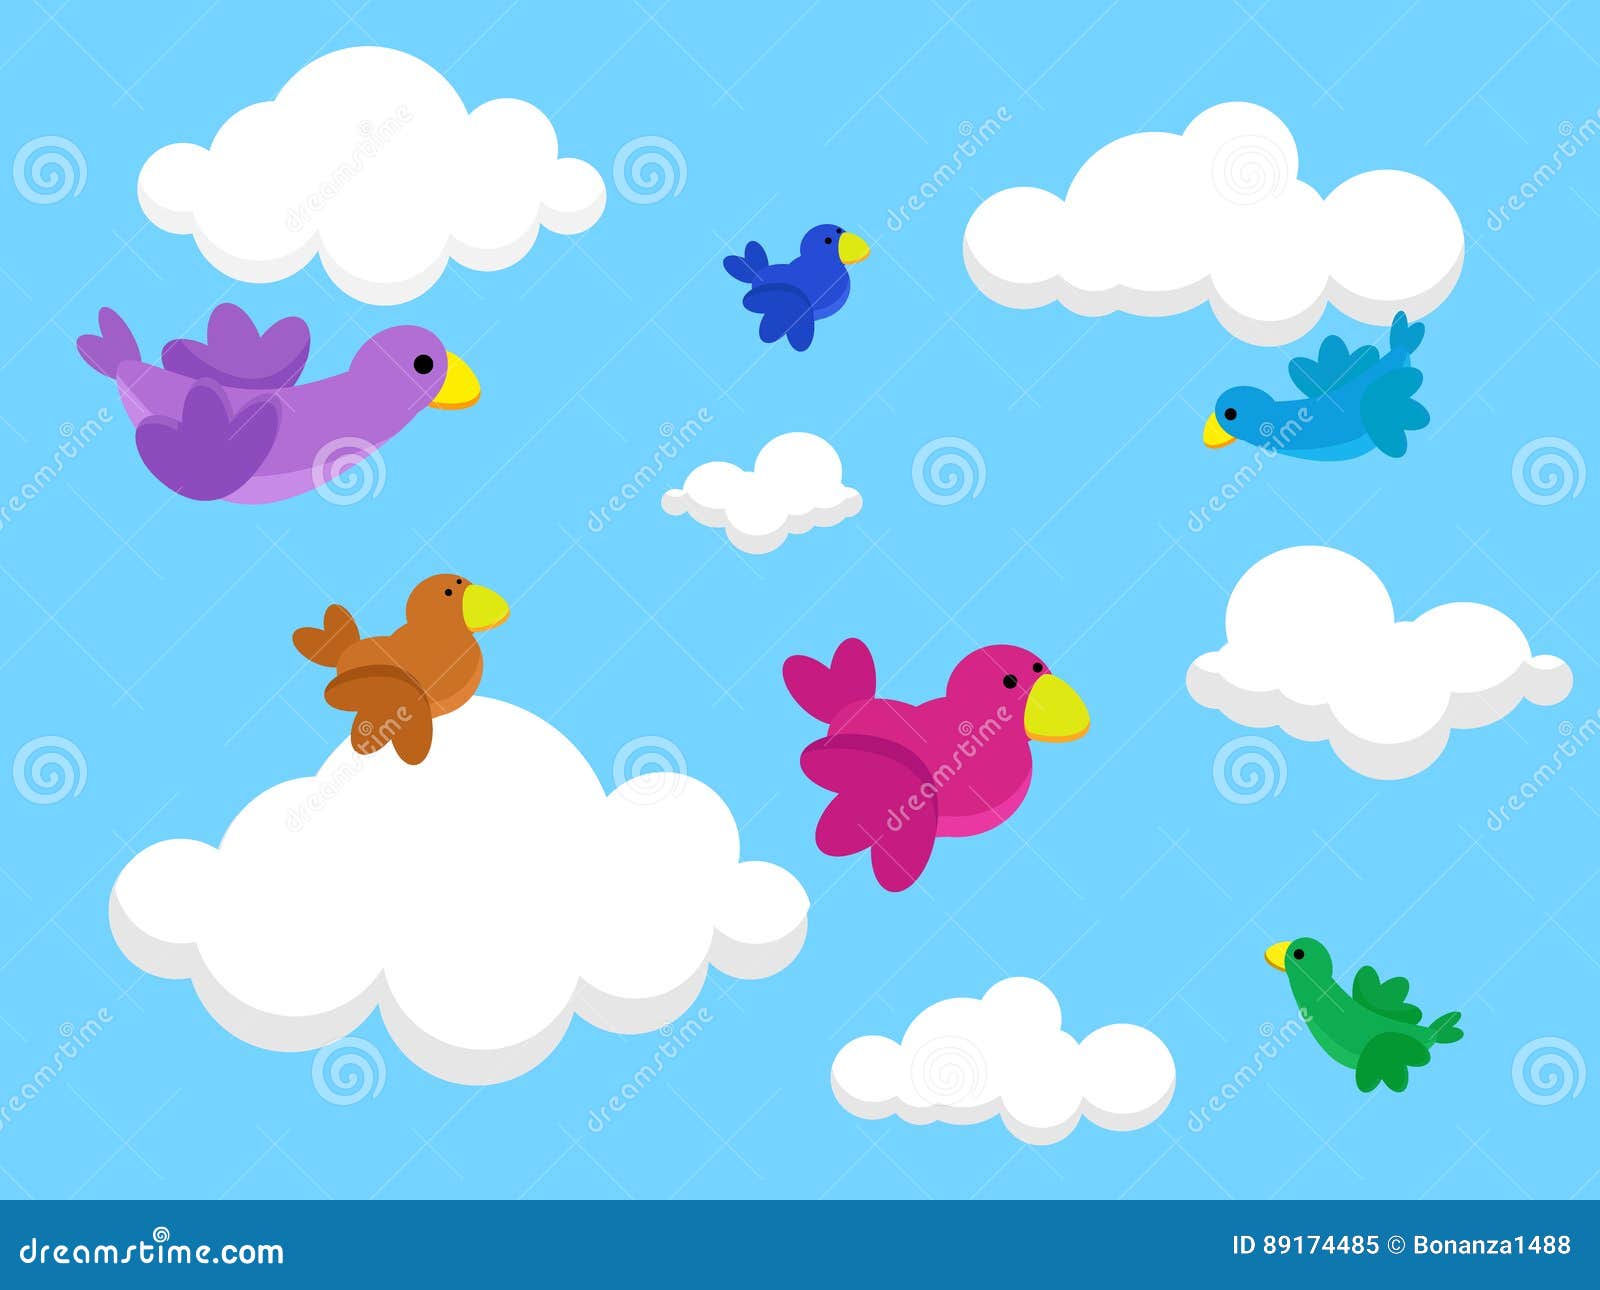 Beautiful Birds in the sky background Images for your nature projects